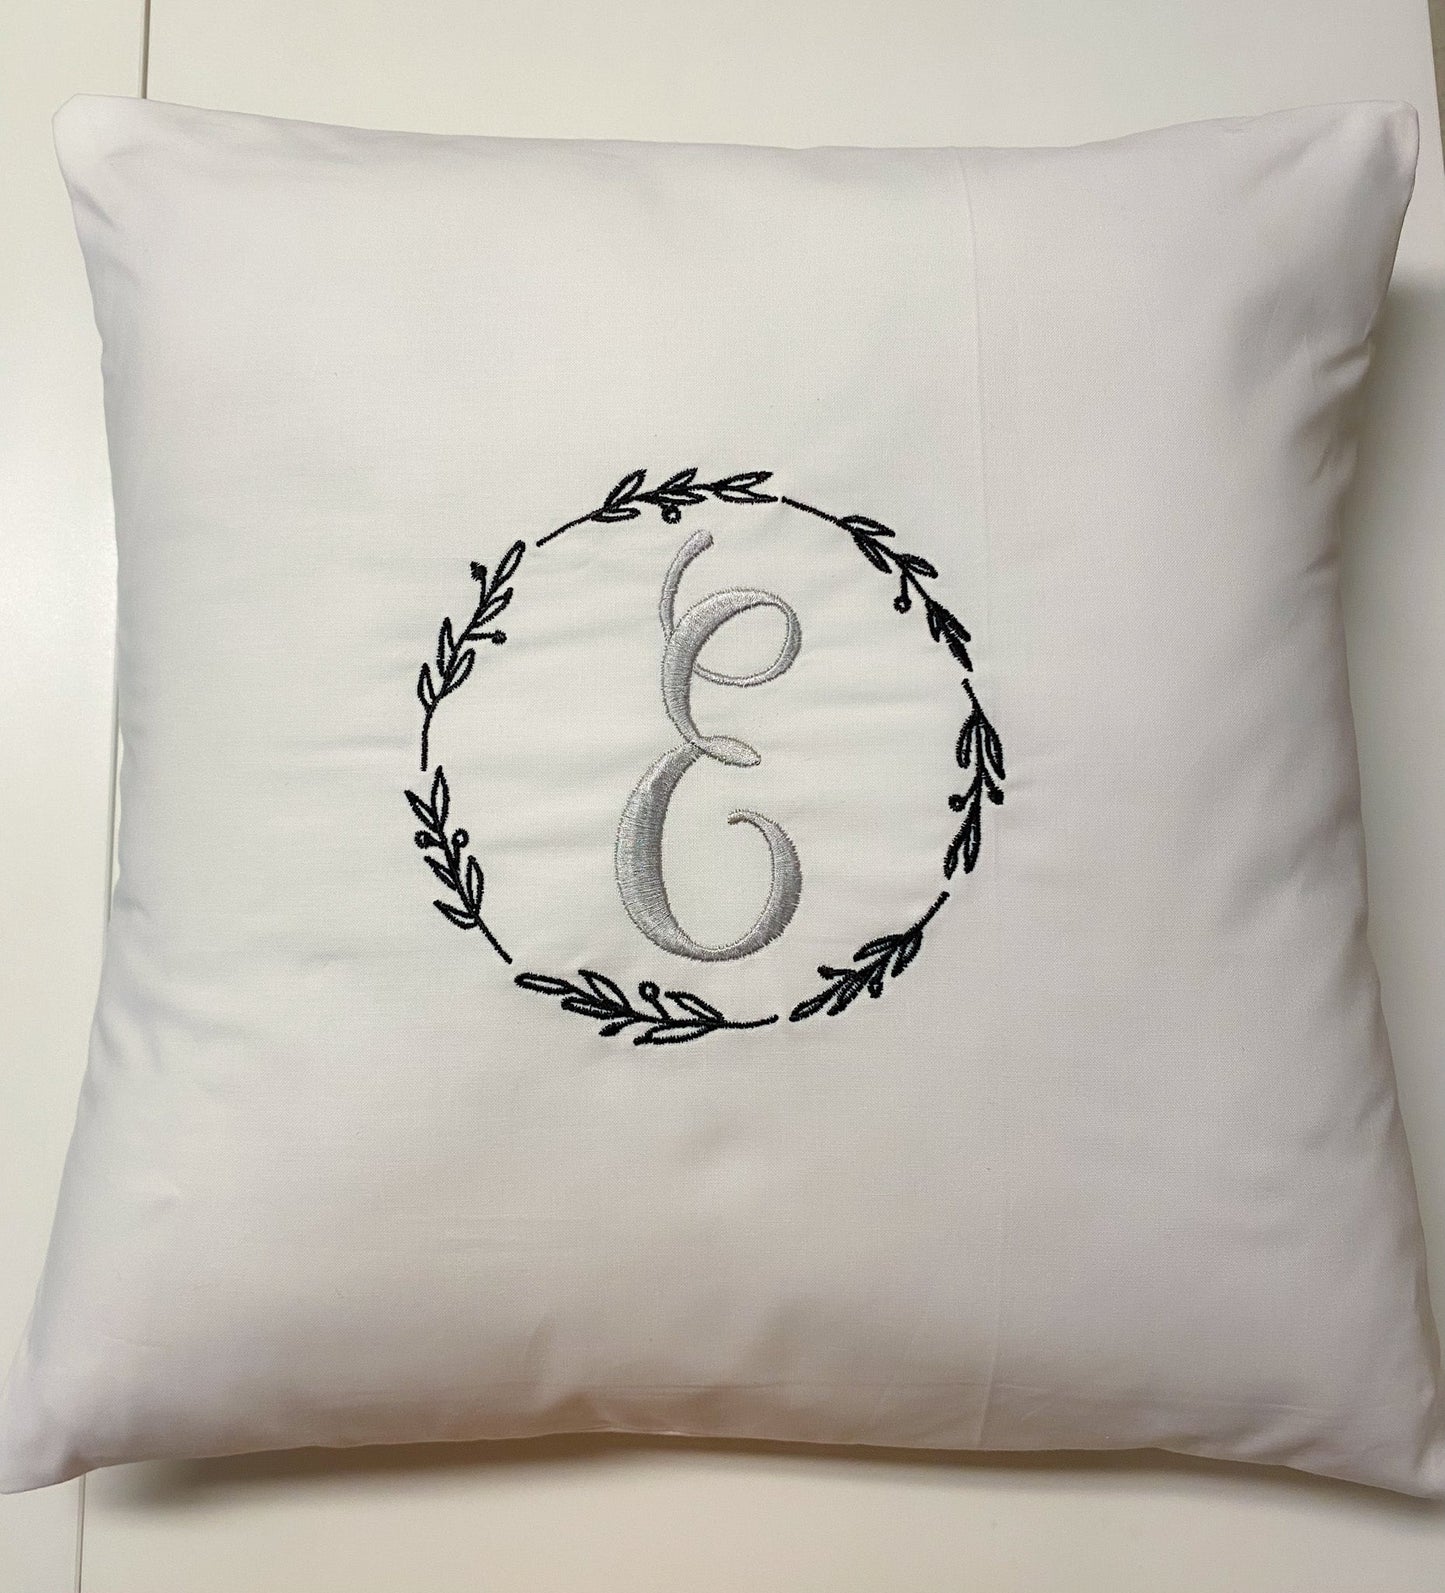 Custom Embroidery Pillow - Embroidery